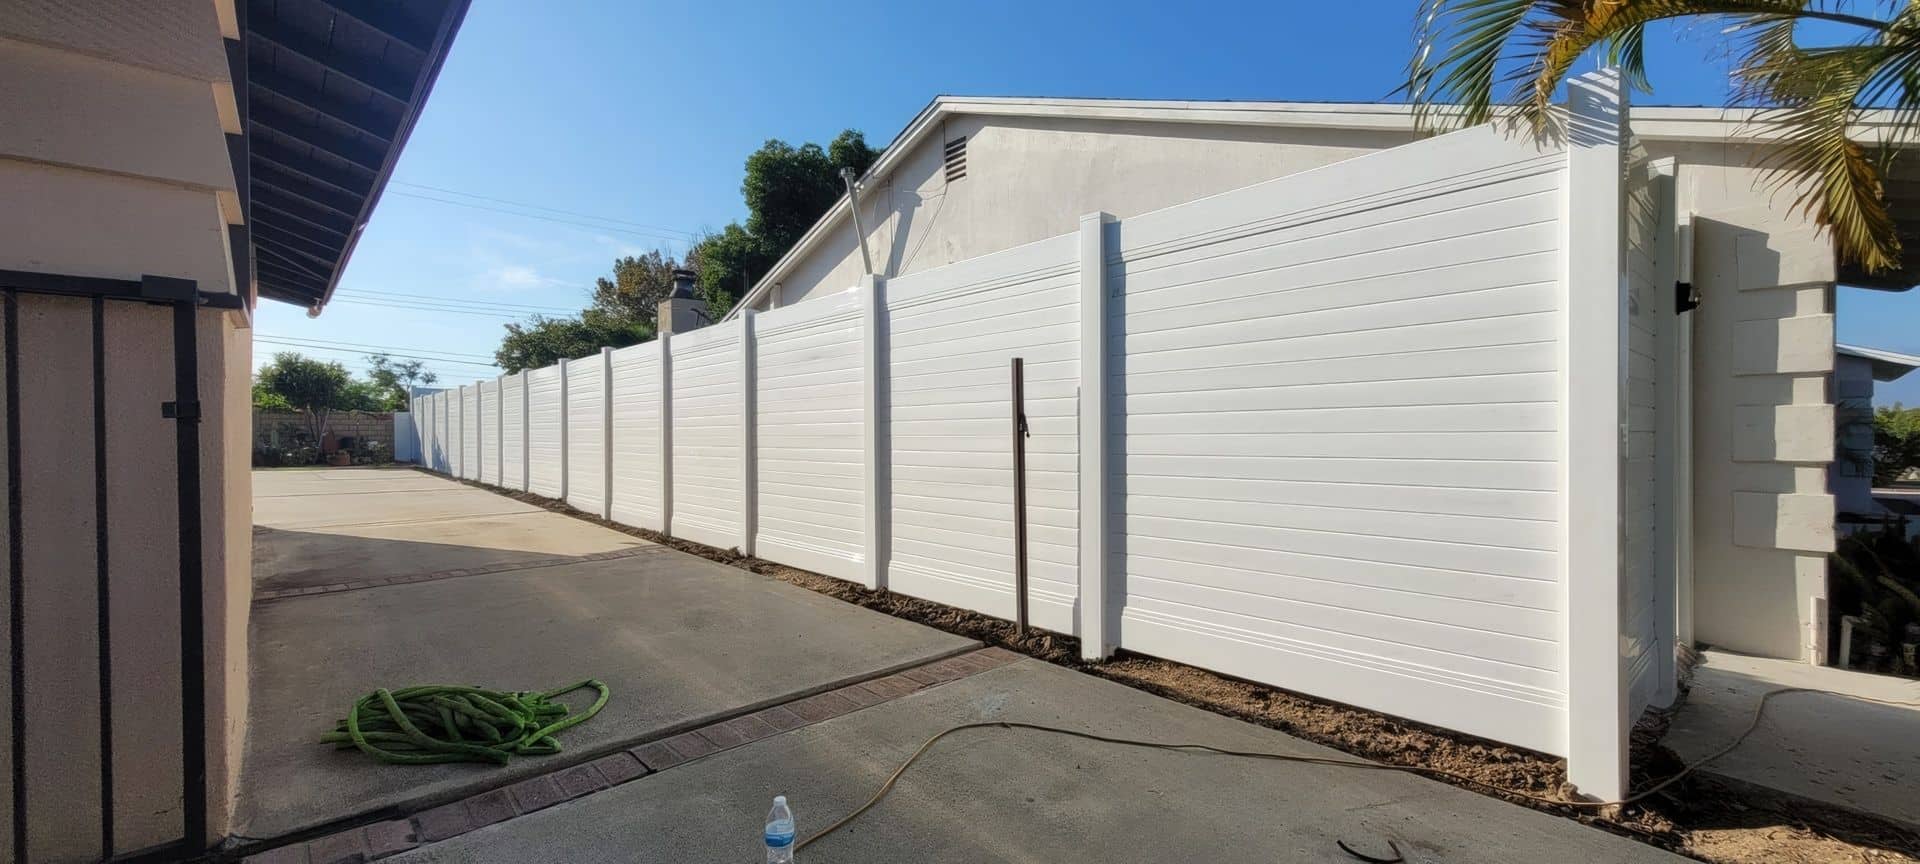 Vinyl privacy horizontal fence creating boundary between two suburban houses with concrete side passage leading to backyard